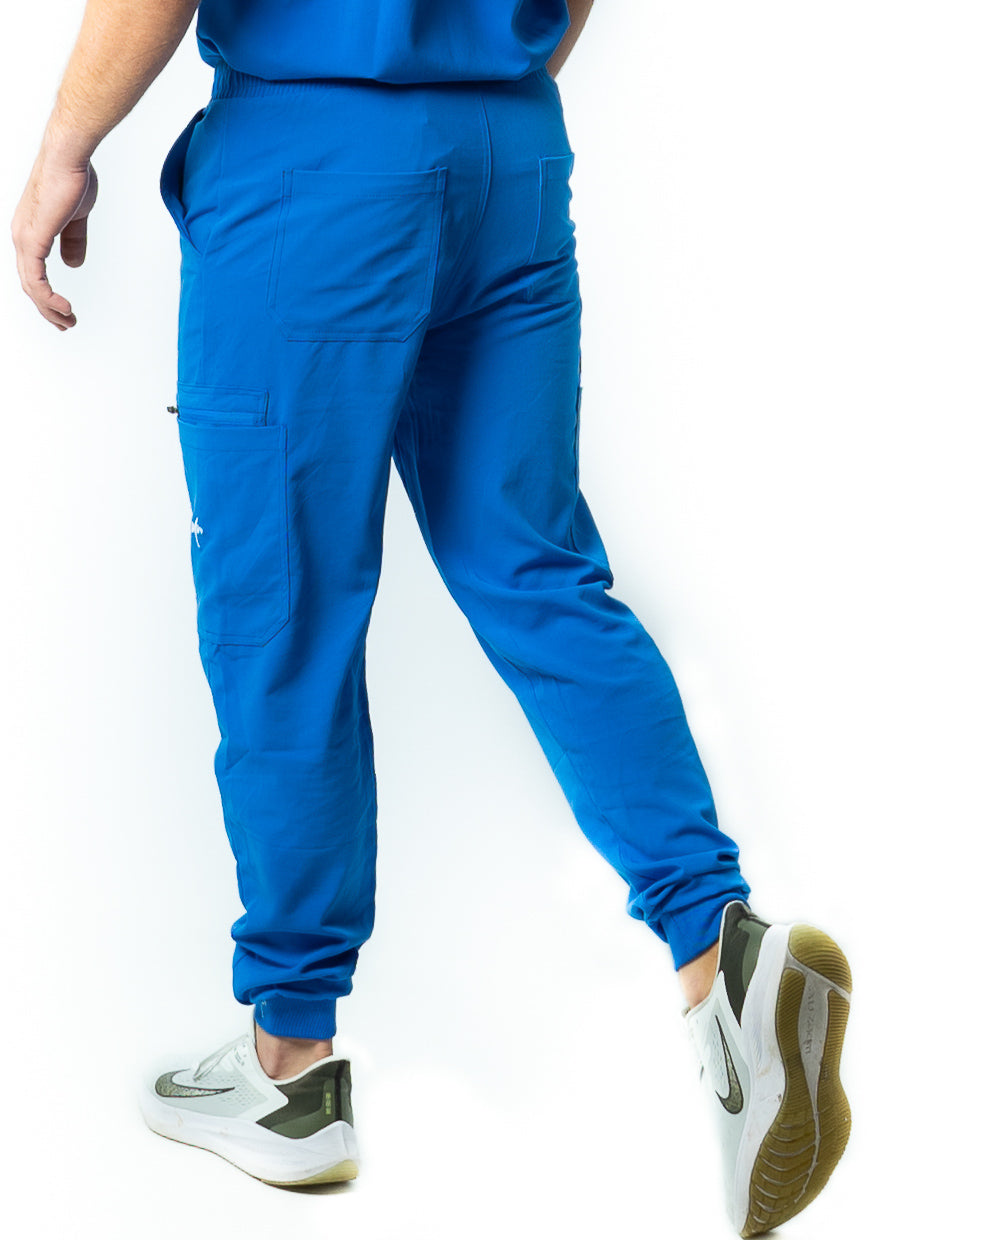 Buy Mens Casual Chinos Trousers Peach Royal Blue and Black Combo of 3 PV  Cotton for Best Price, Reviews, Free Shipping